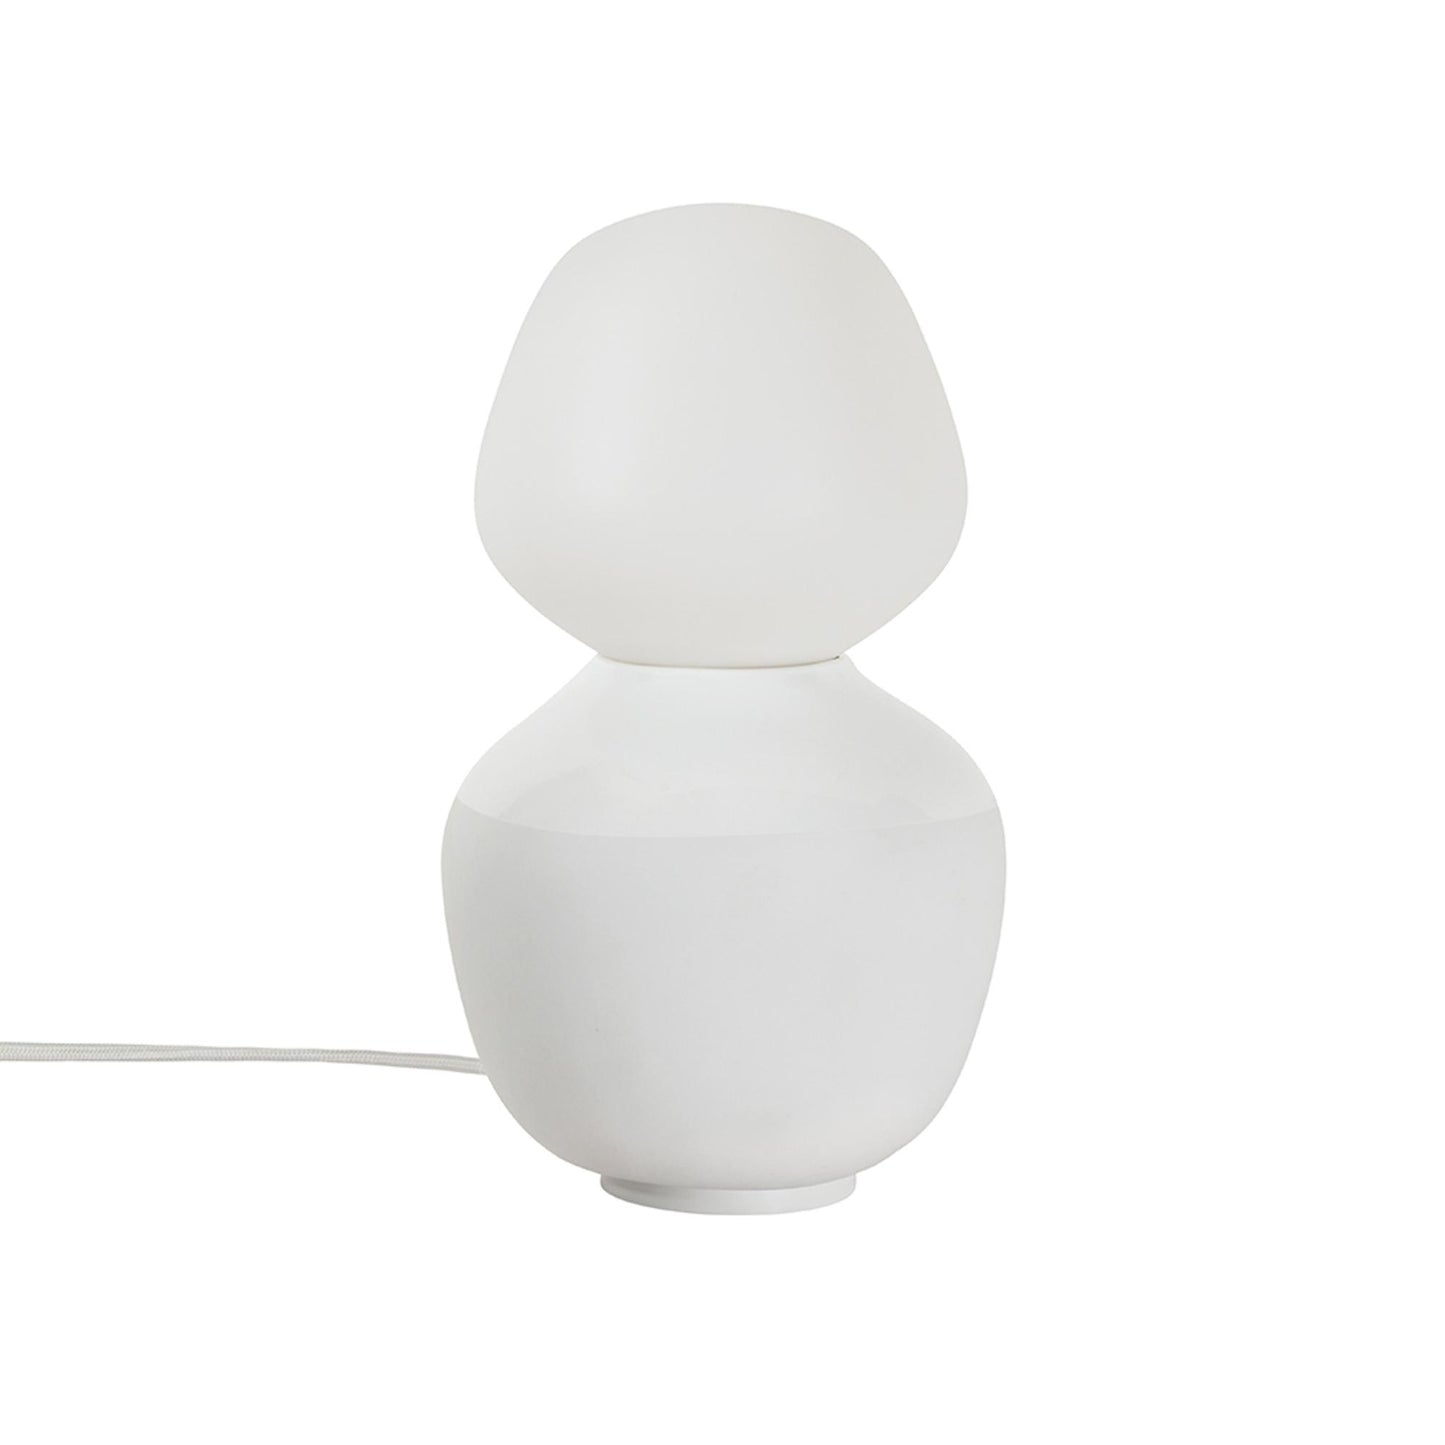 Reflection Enno Table Lamp by Tala #White